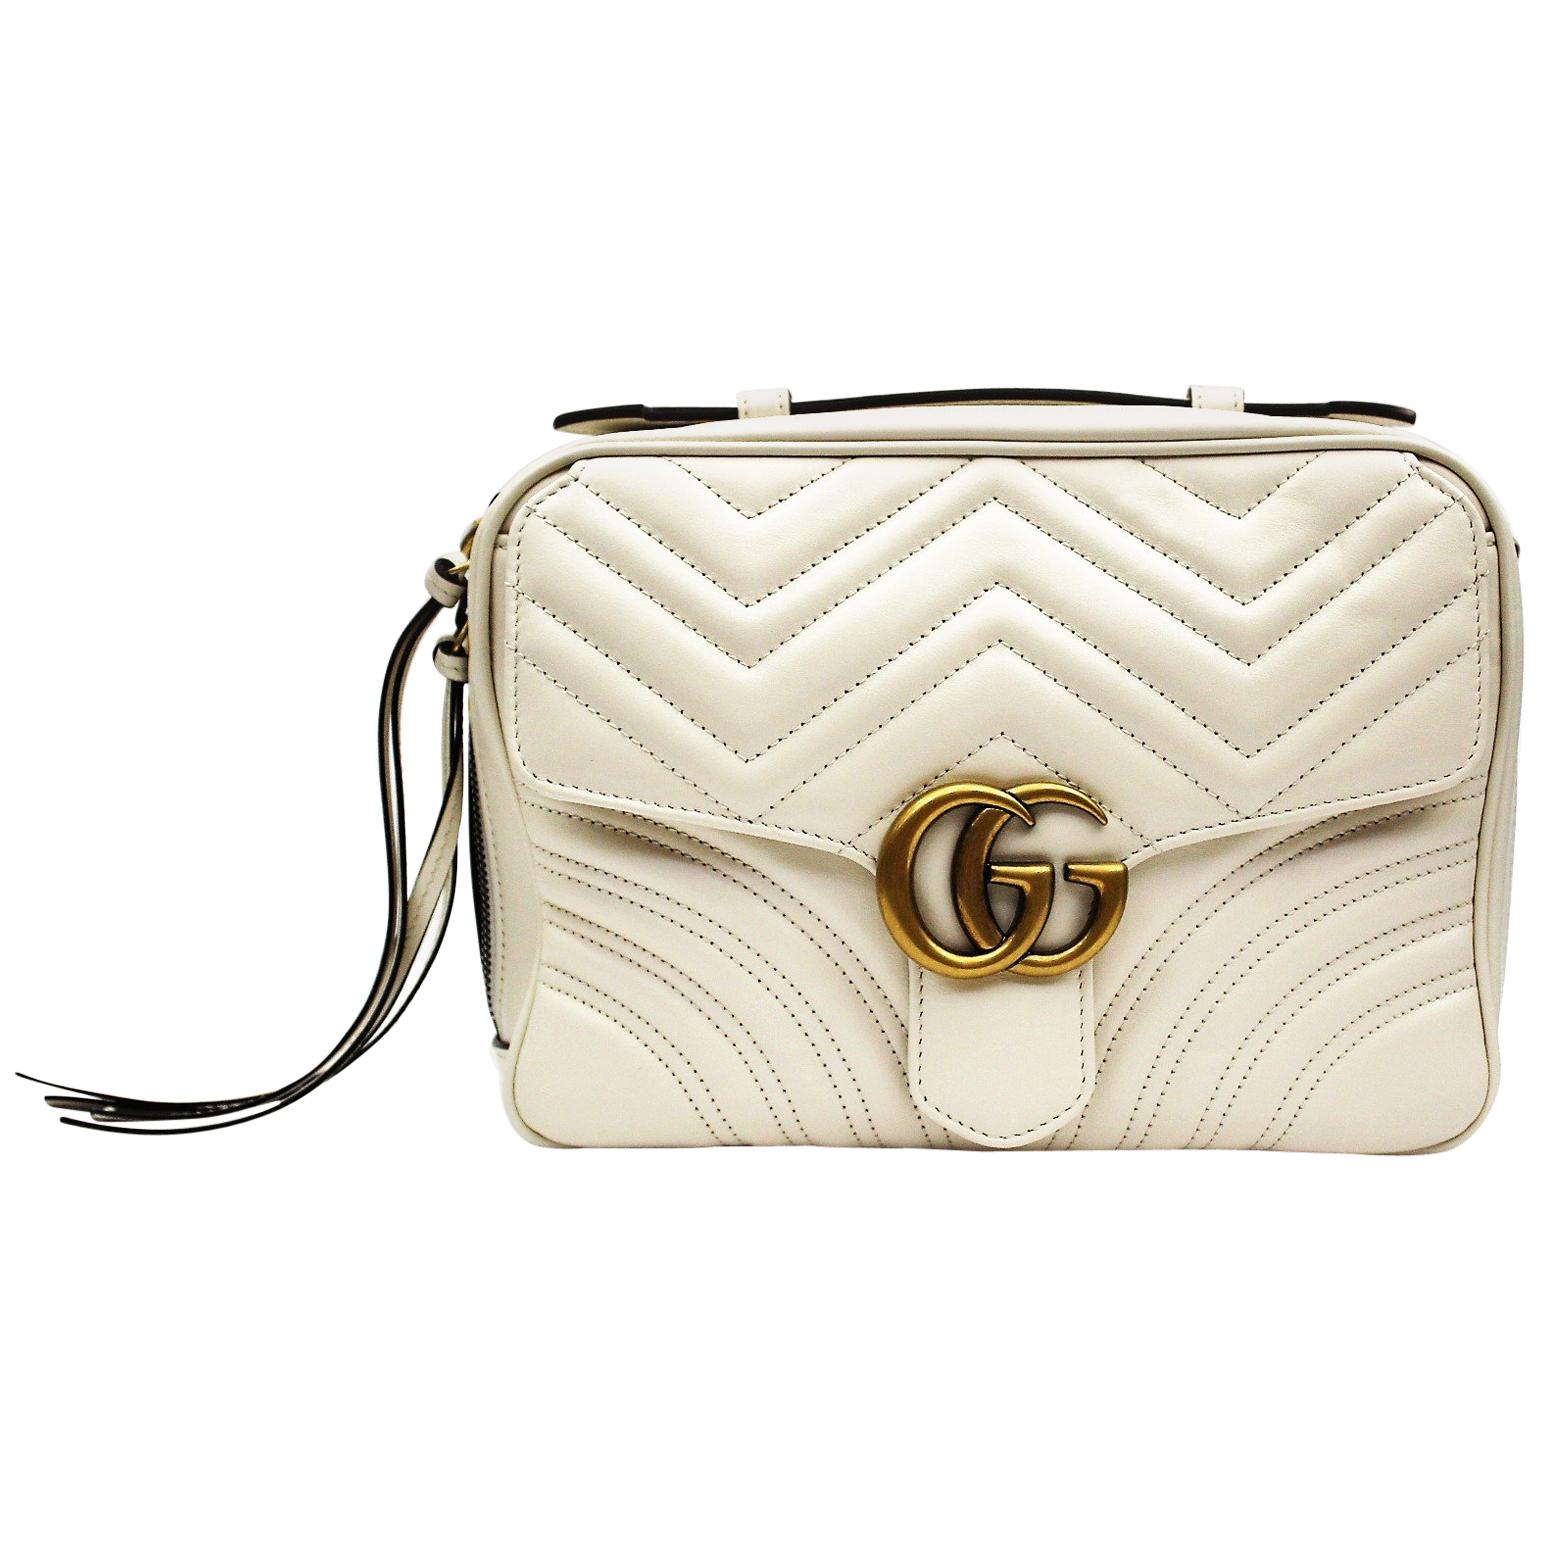 Gucci White Leather Shoulder Marmont Bag